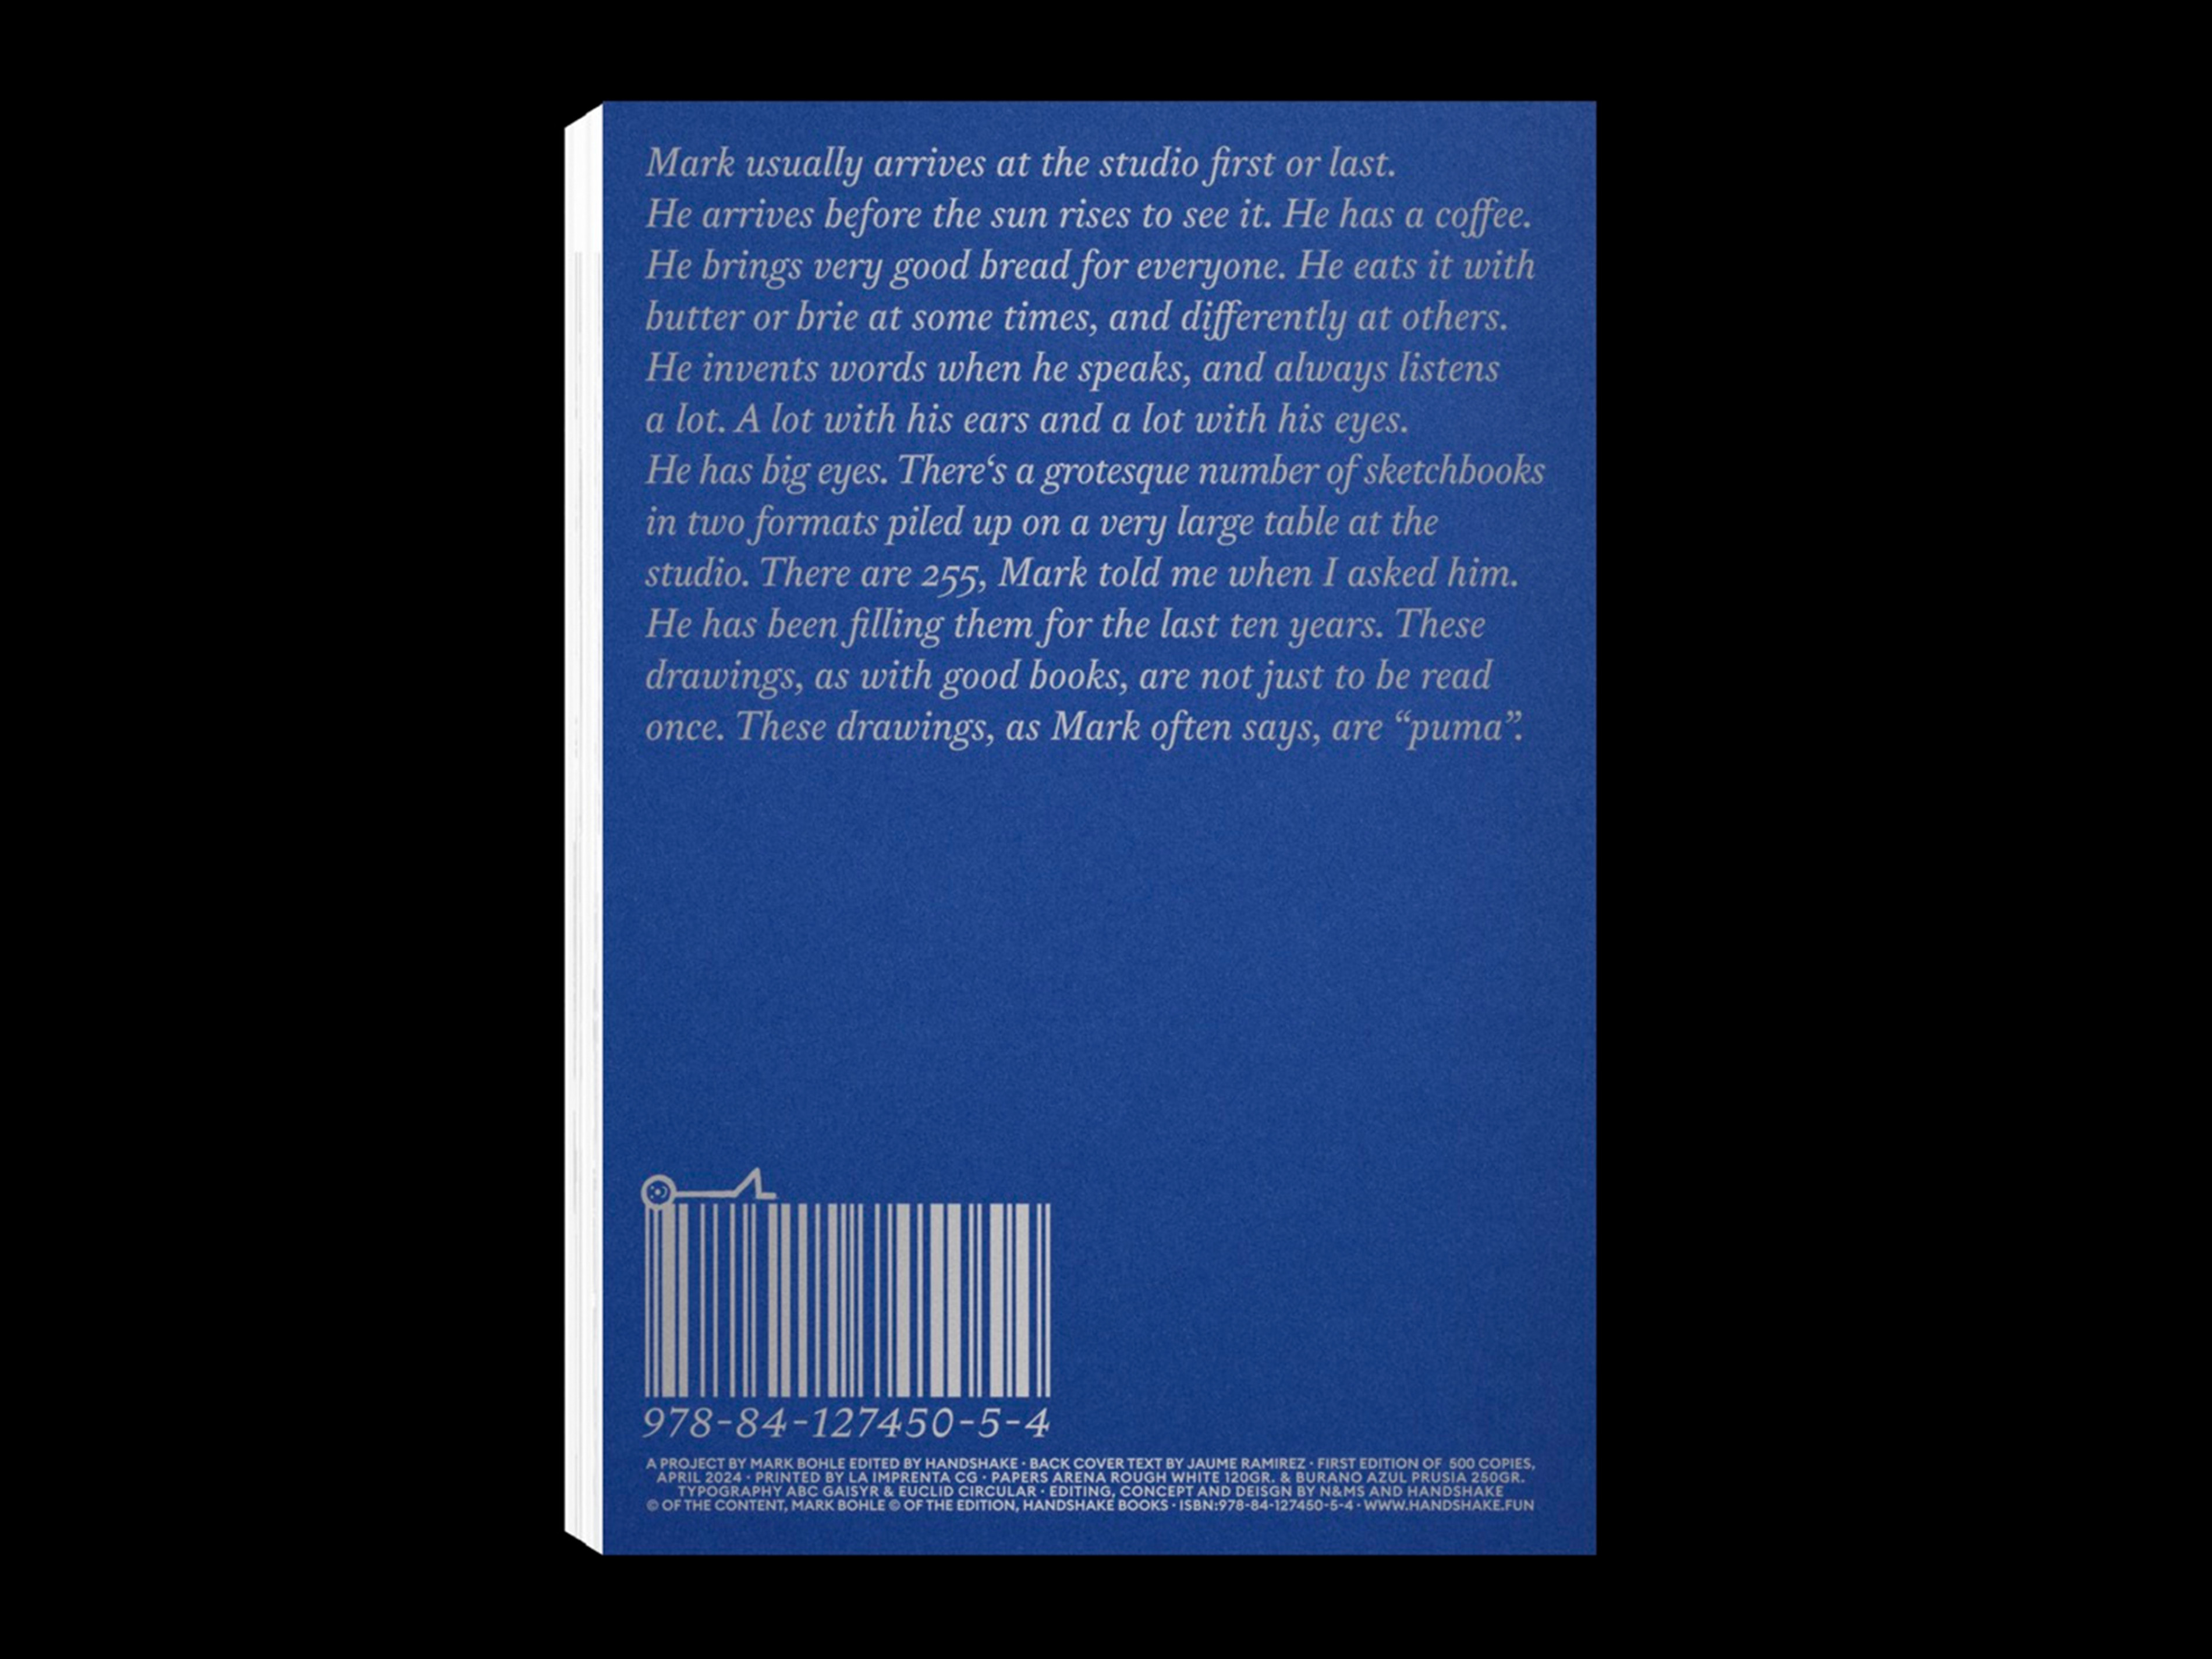 The back from the book. Blue background and silver text on top.